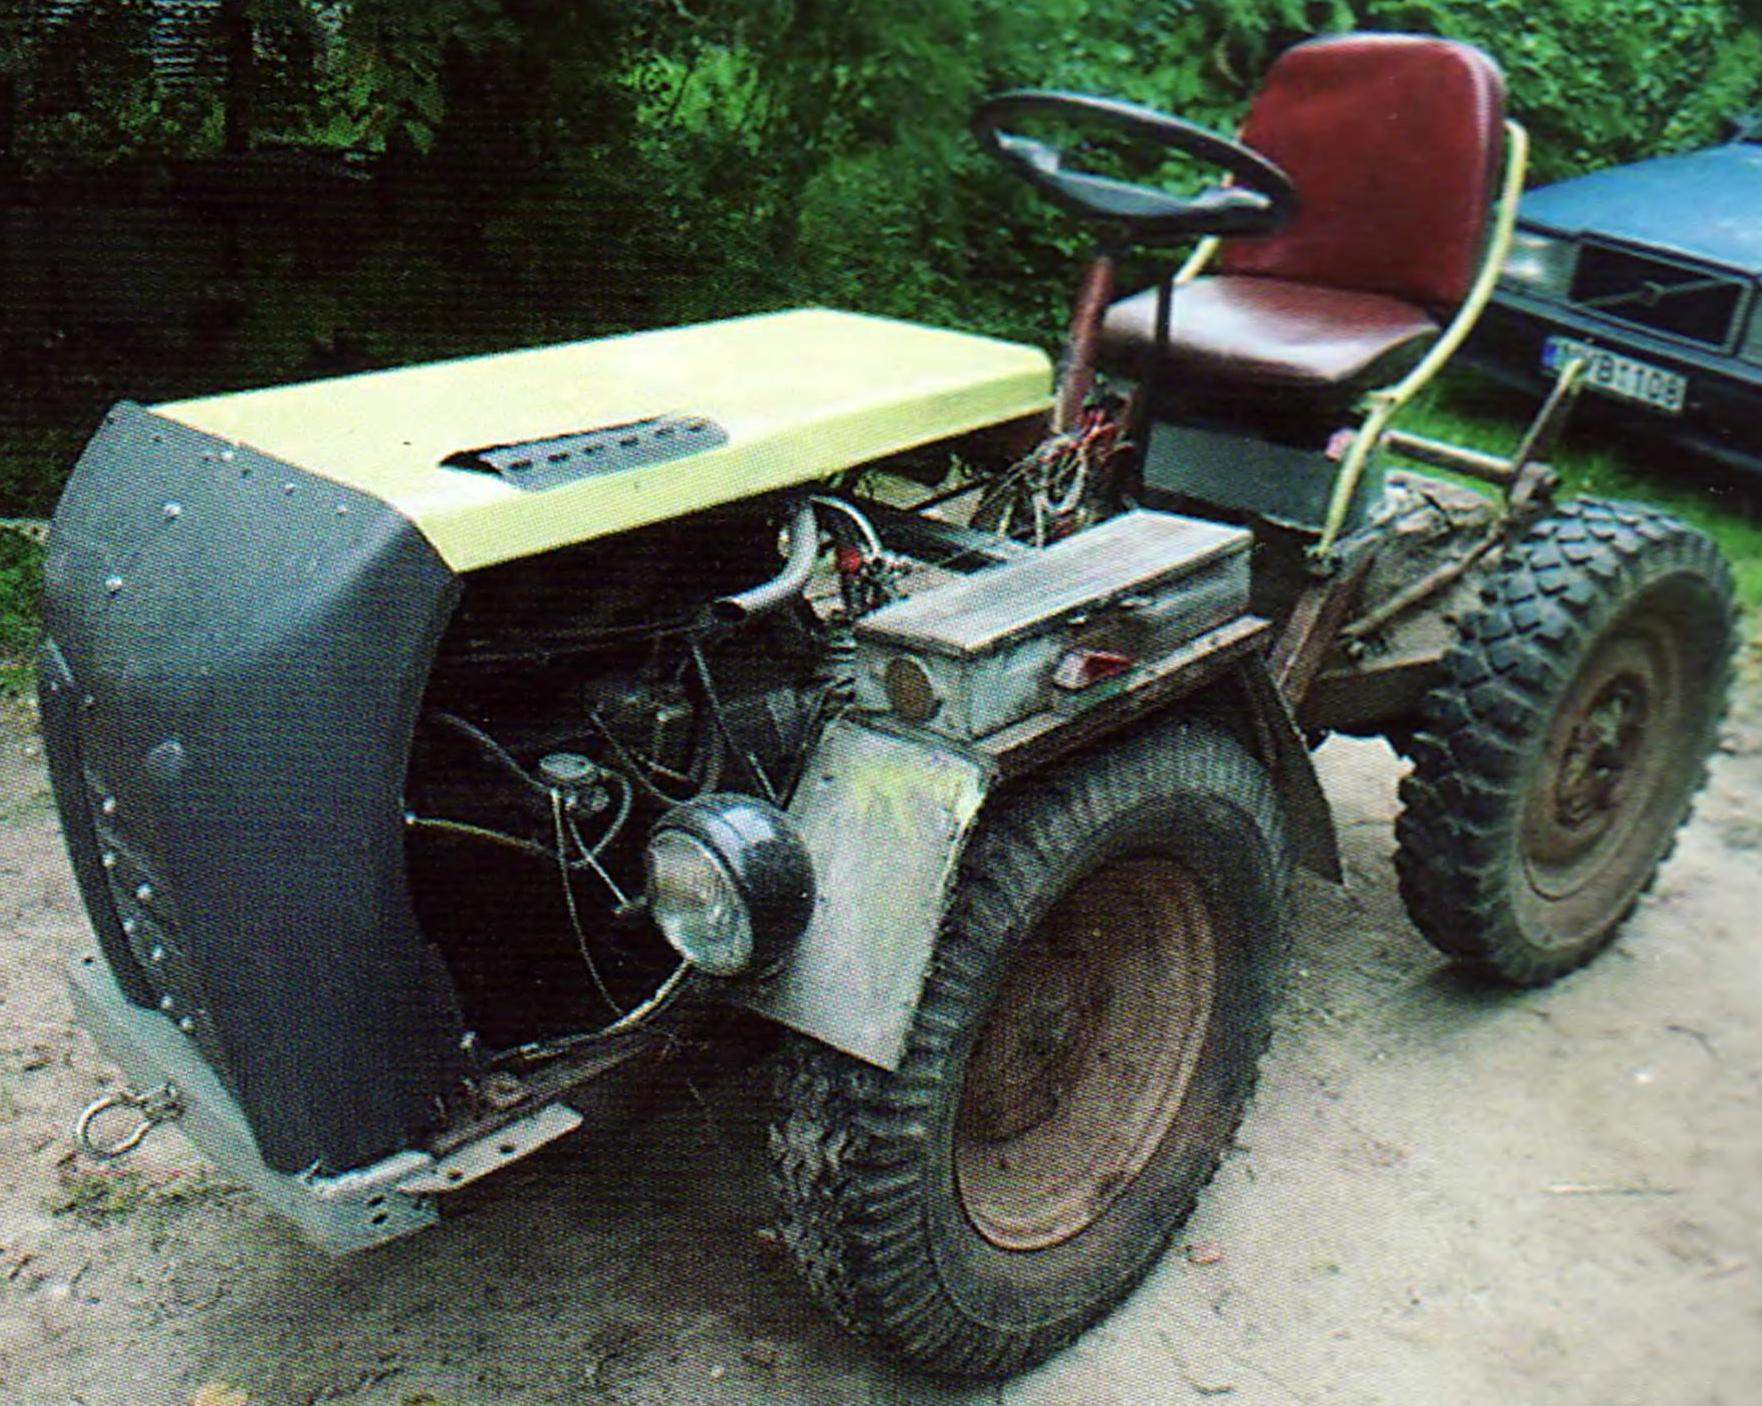 MINI-TRACTOR FROM LITHUANIA